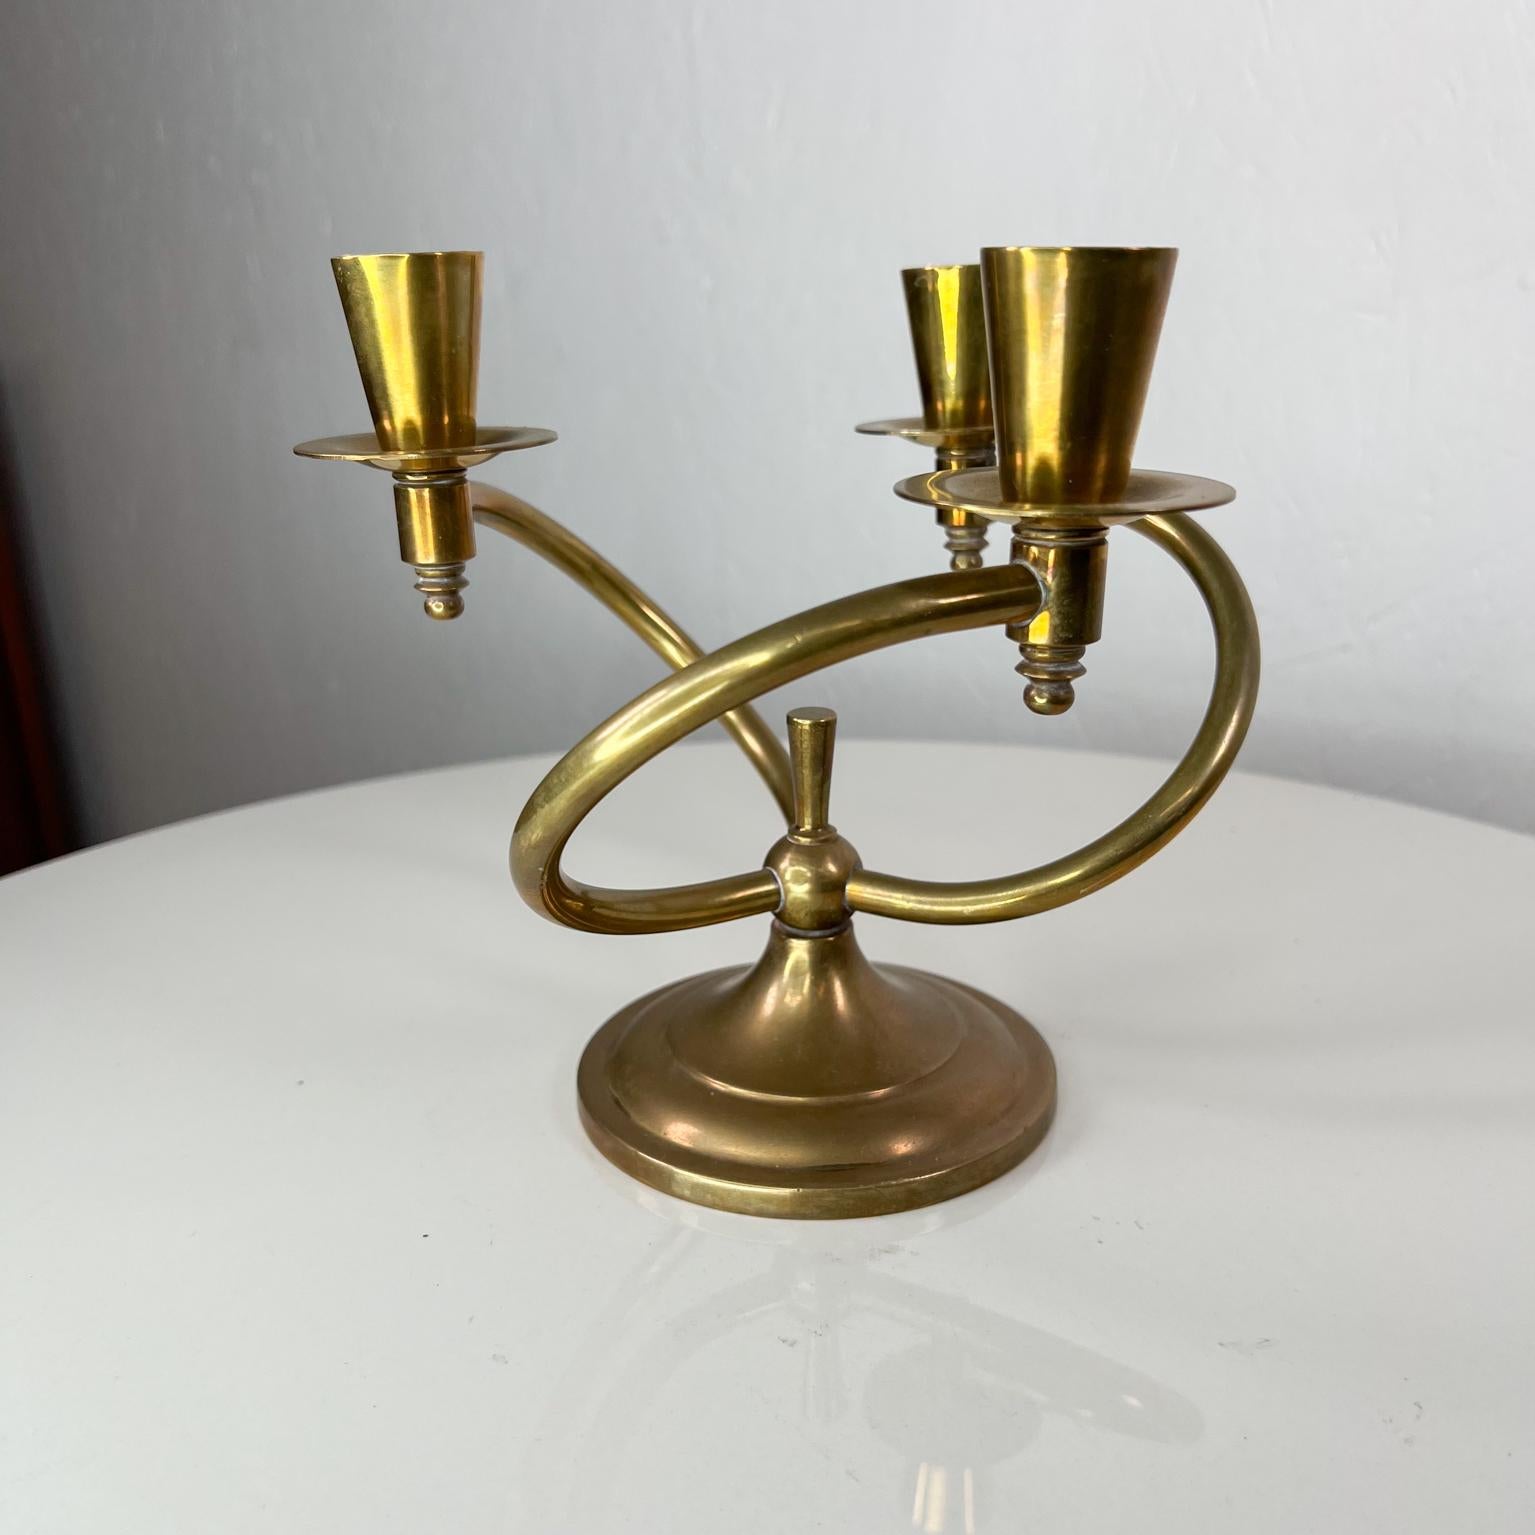 Midcentury Modern Sculptural Brass Three Arm Candle Holder Candelabra
Quality handcrafted. Organic curves.
7.5 diameter x 7.25 tall
Original unrestored preowned vintage condition
See images provided
